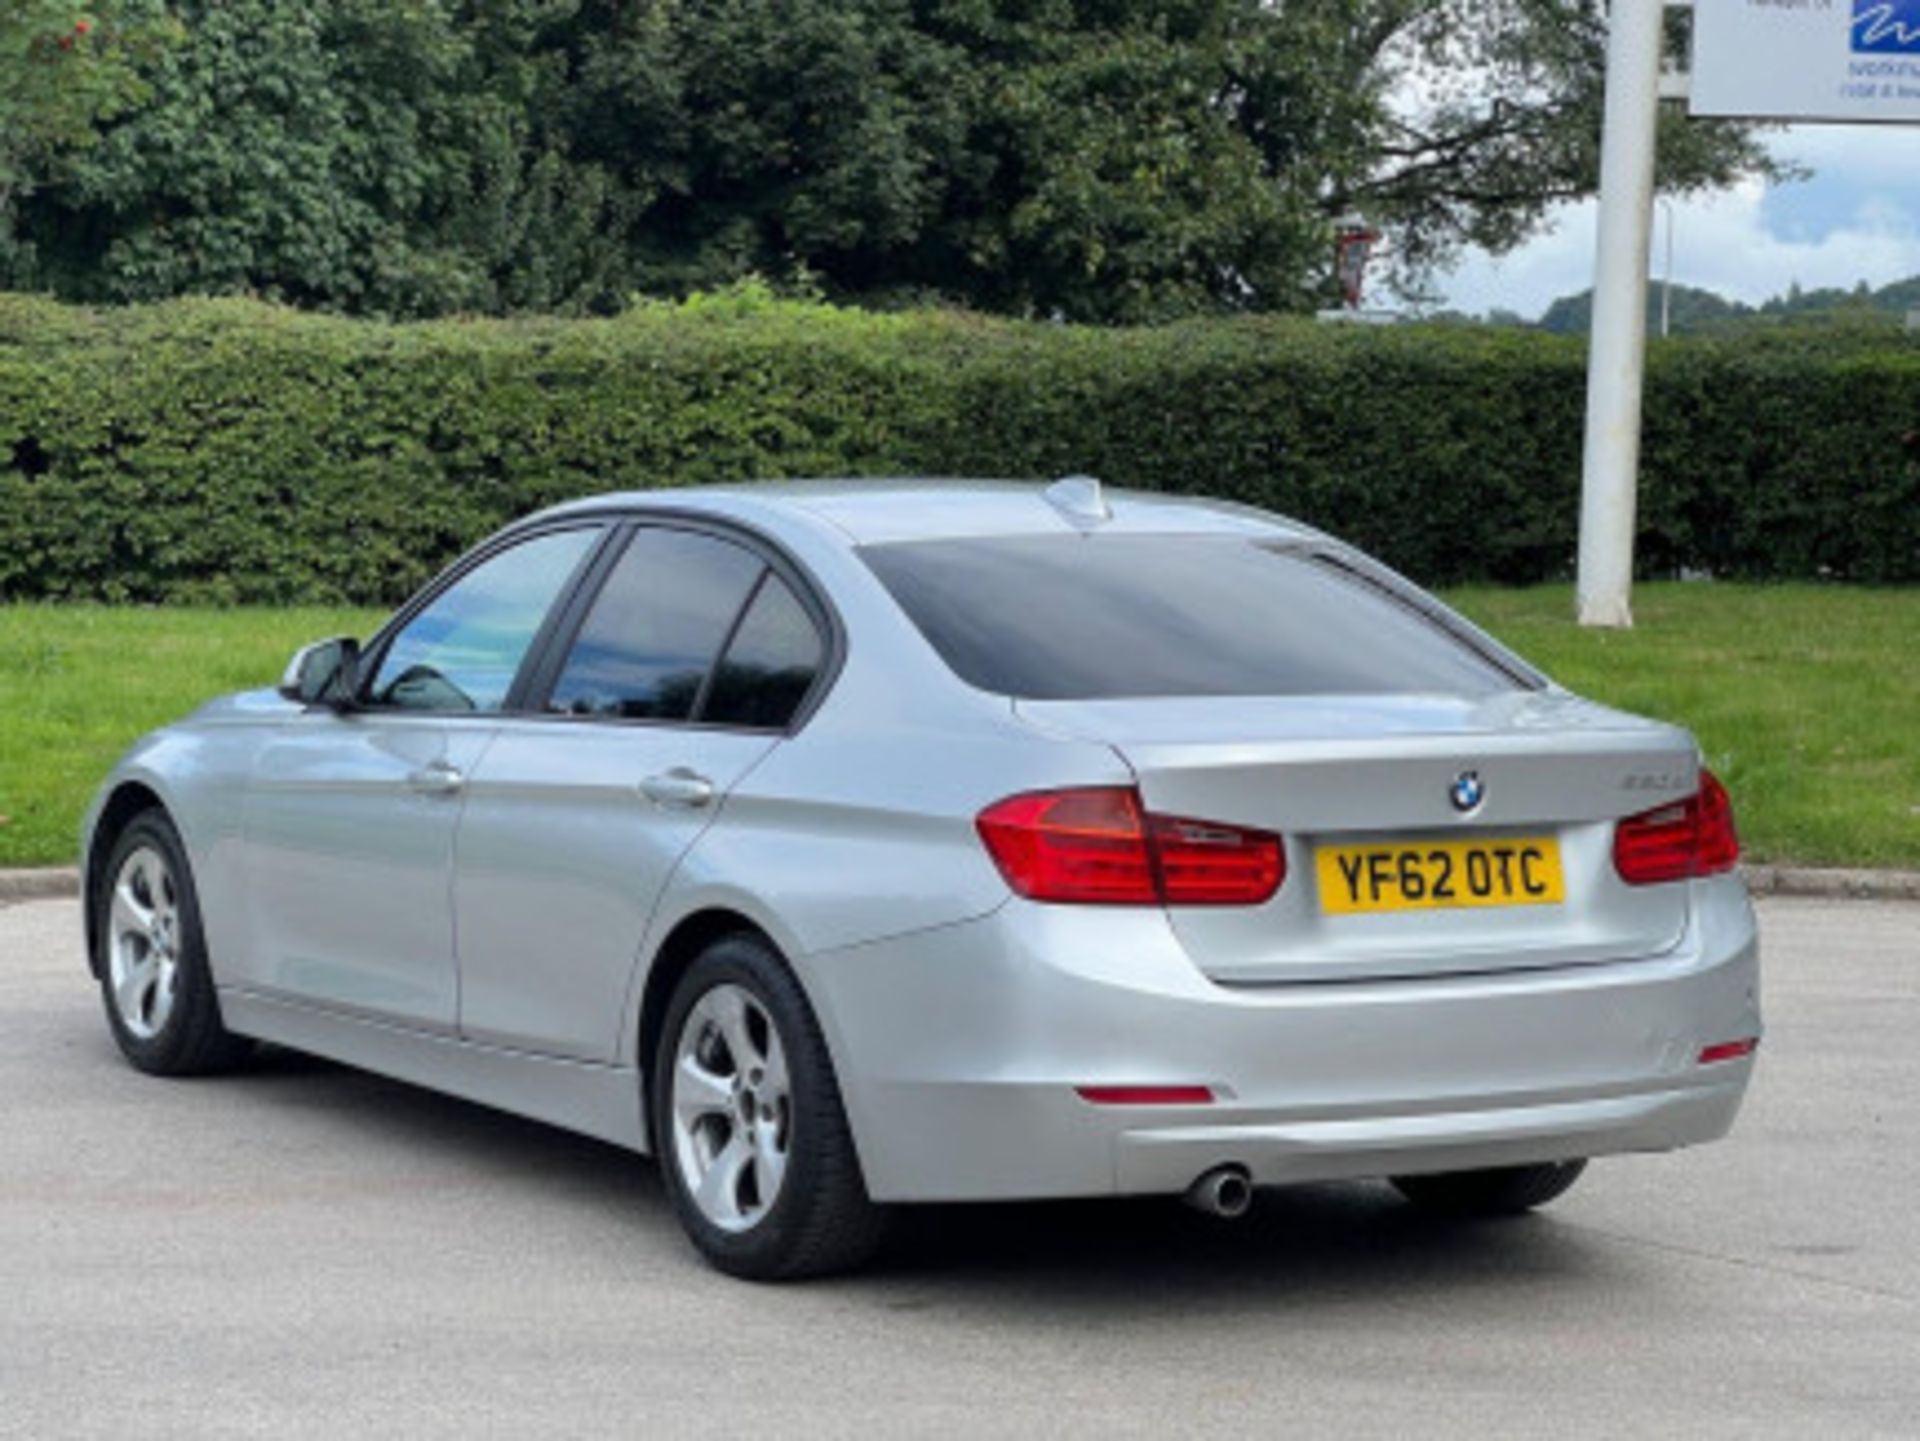 BMW 3 SERIES 2.0 DIESEL ED START STOP - A WELL-MAINTAINED GEM >>--NO VAT ON HAMMER--<< - Image 117 of 229